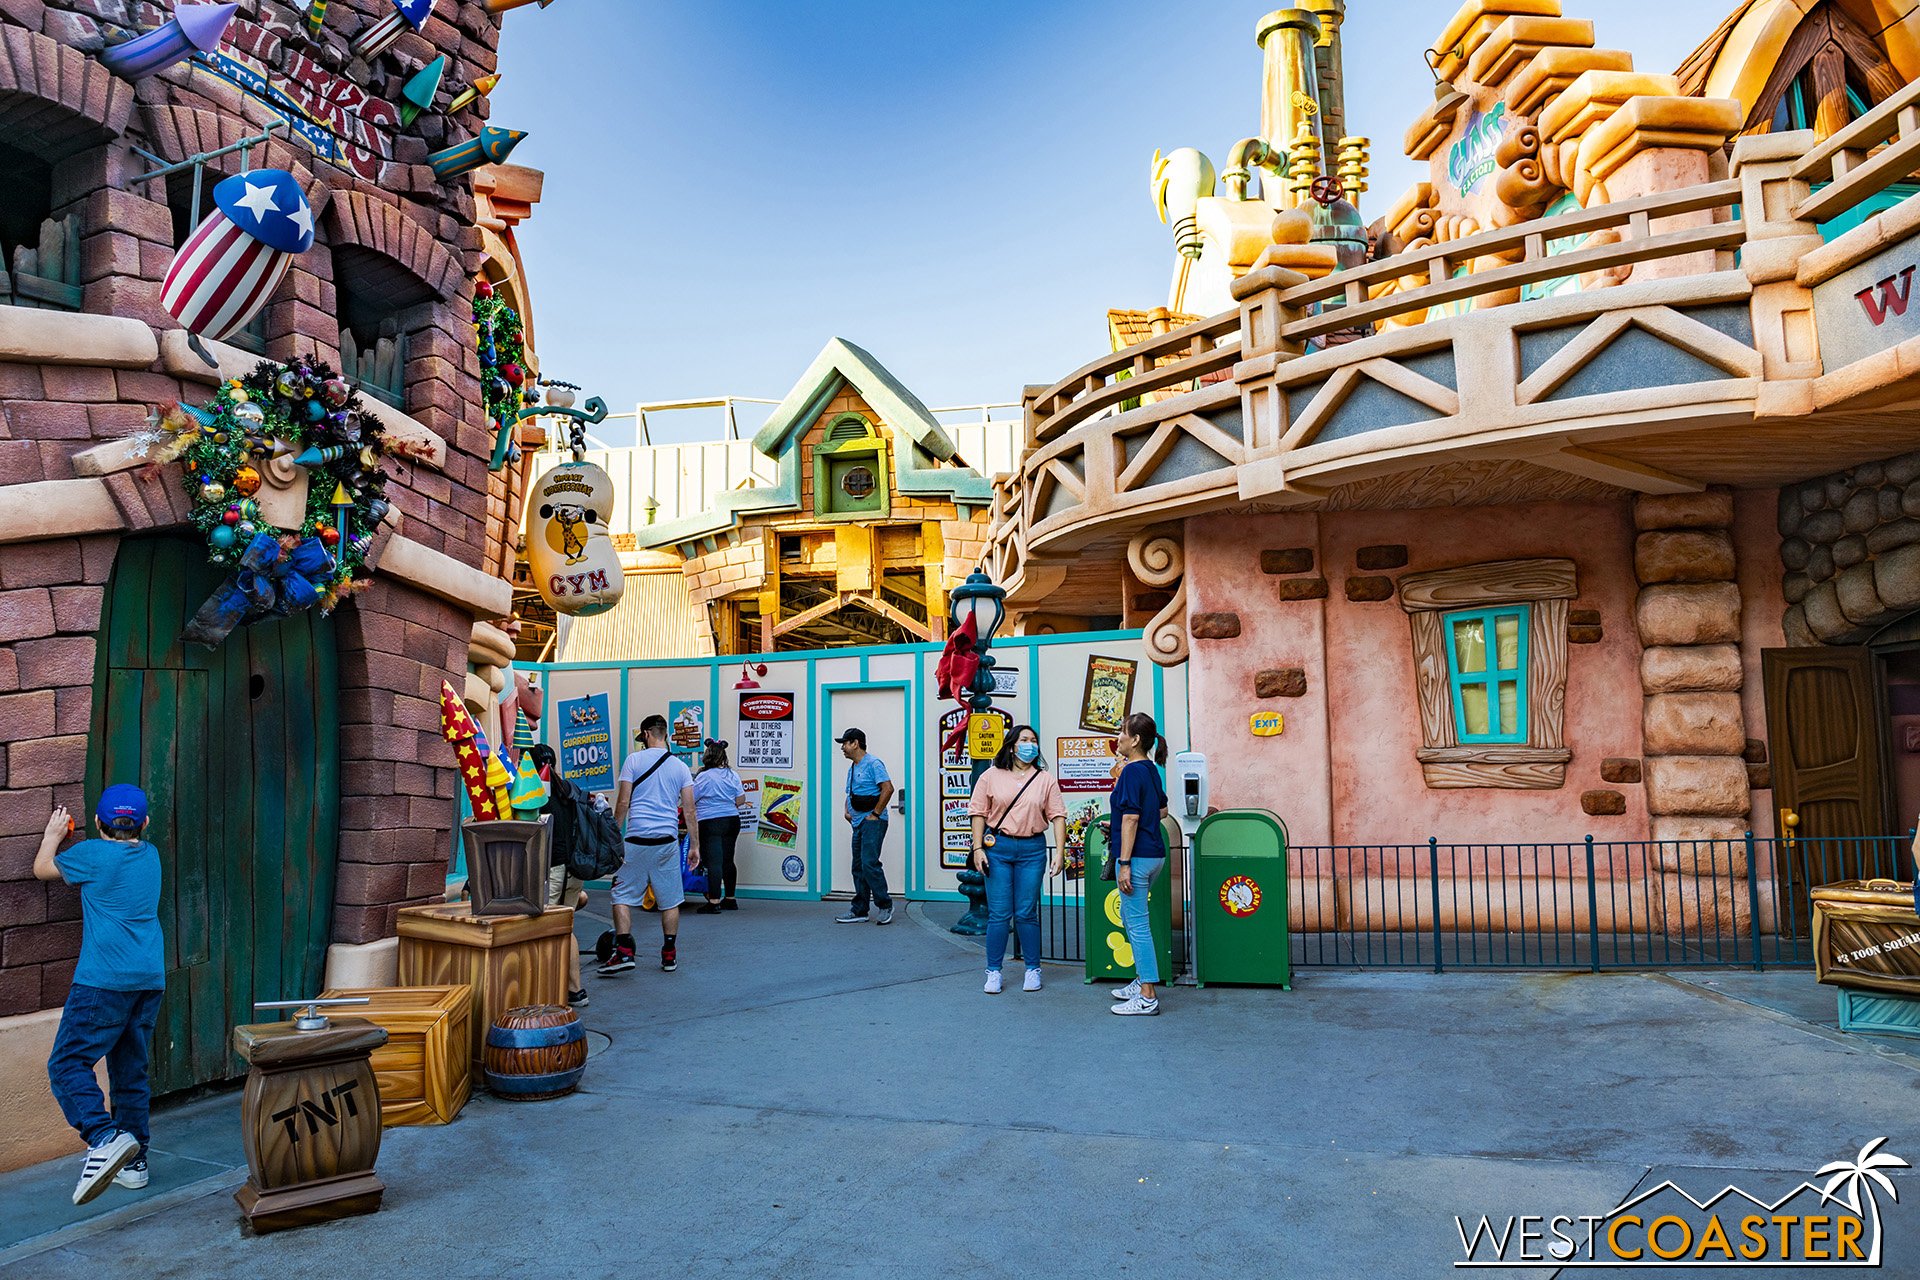  Back over near the Roger Rabbit side, some more partial demolition of the Toontown facades can be seen. 